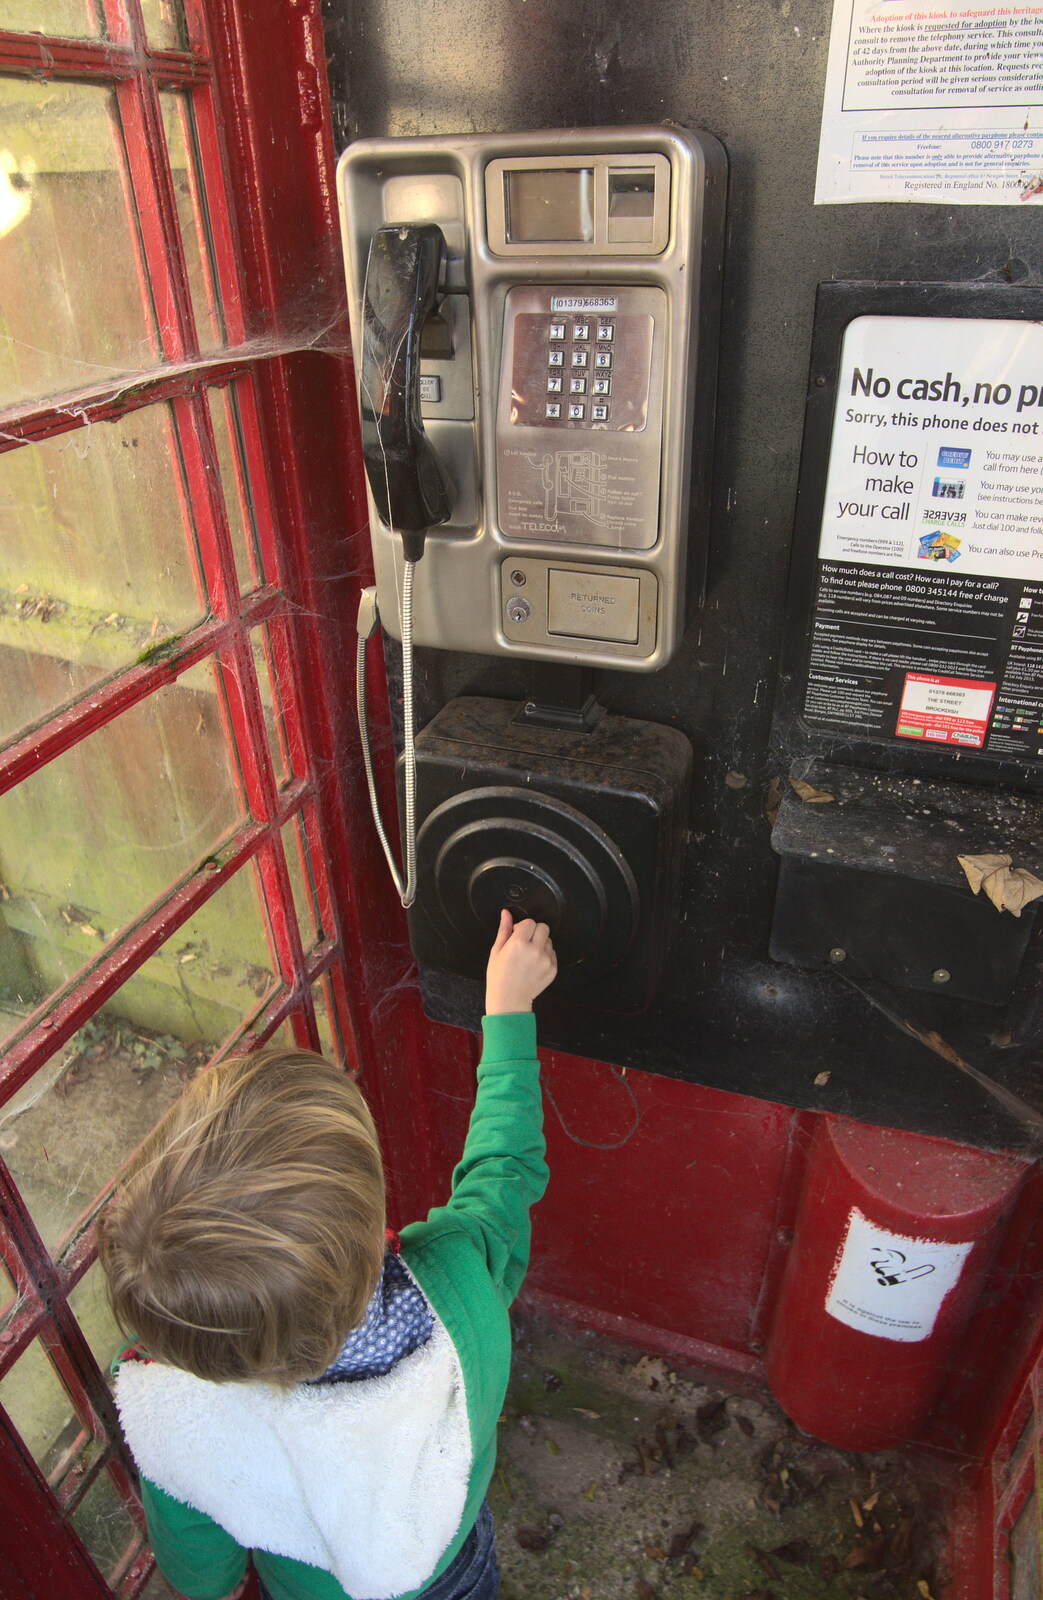 Harry pokes around in the old phone box from Jack's Birthday and New Windows, Brome and Brockdish, Norfolk - 4th December 2016